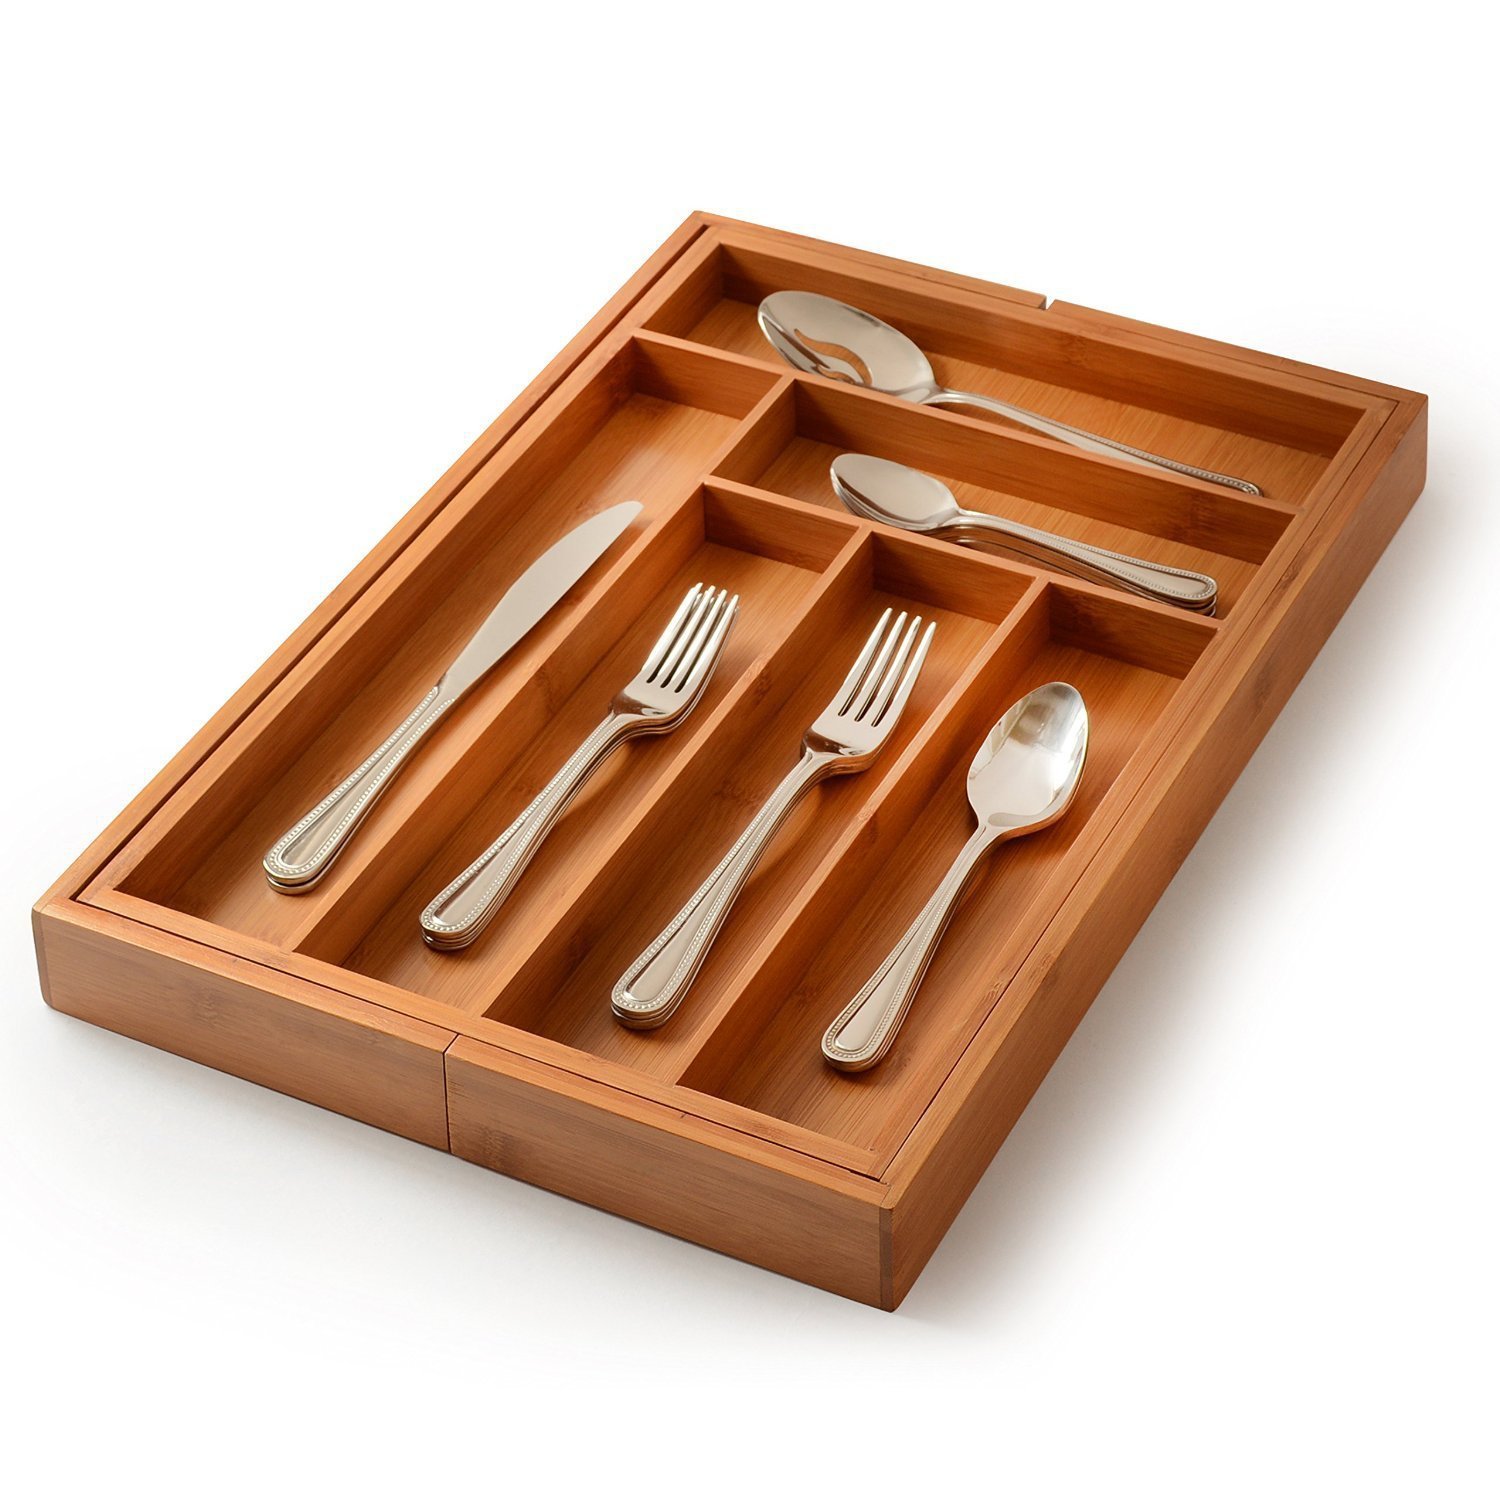 

8 Grid Bamboo Kitchen Drawer Organizer Silverware Storage Container Box and Cutlery Tray